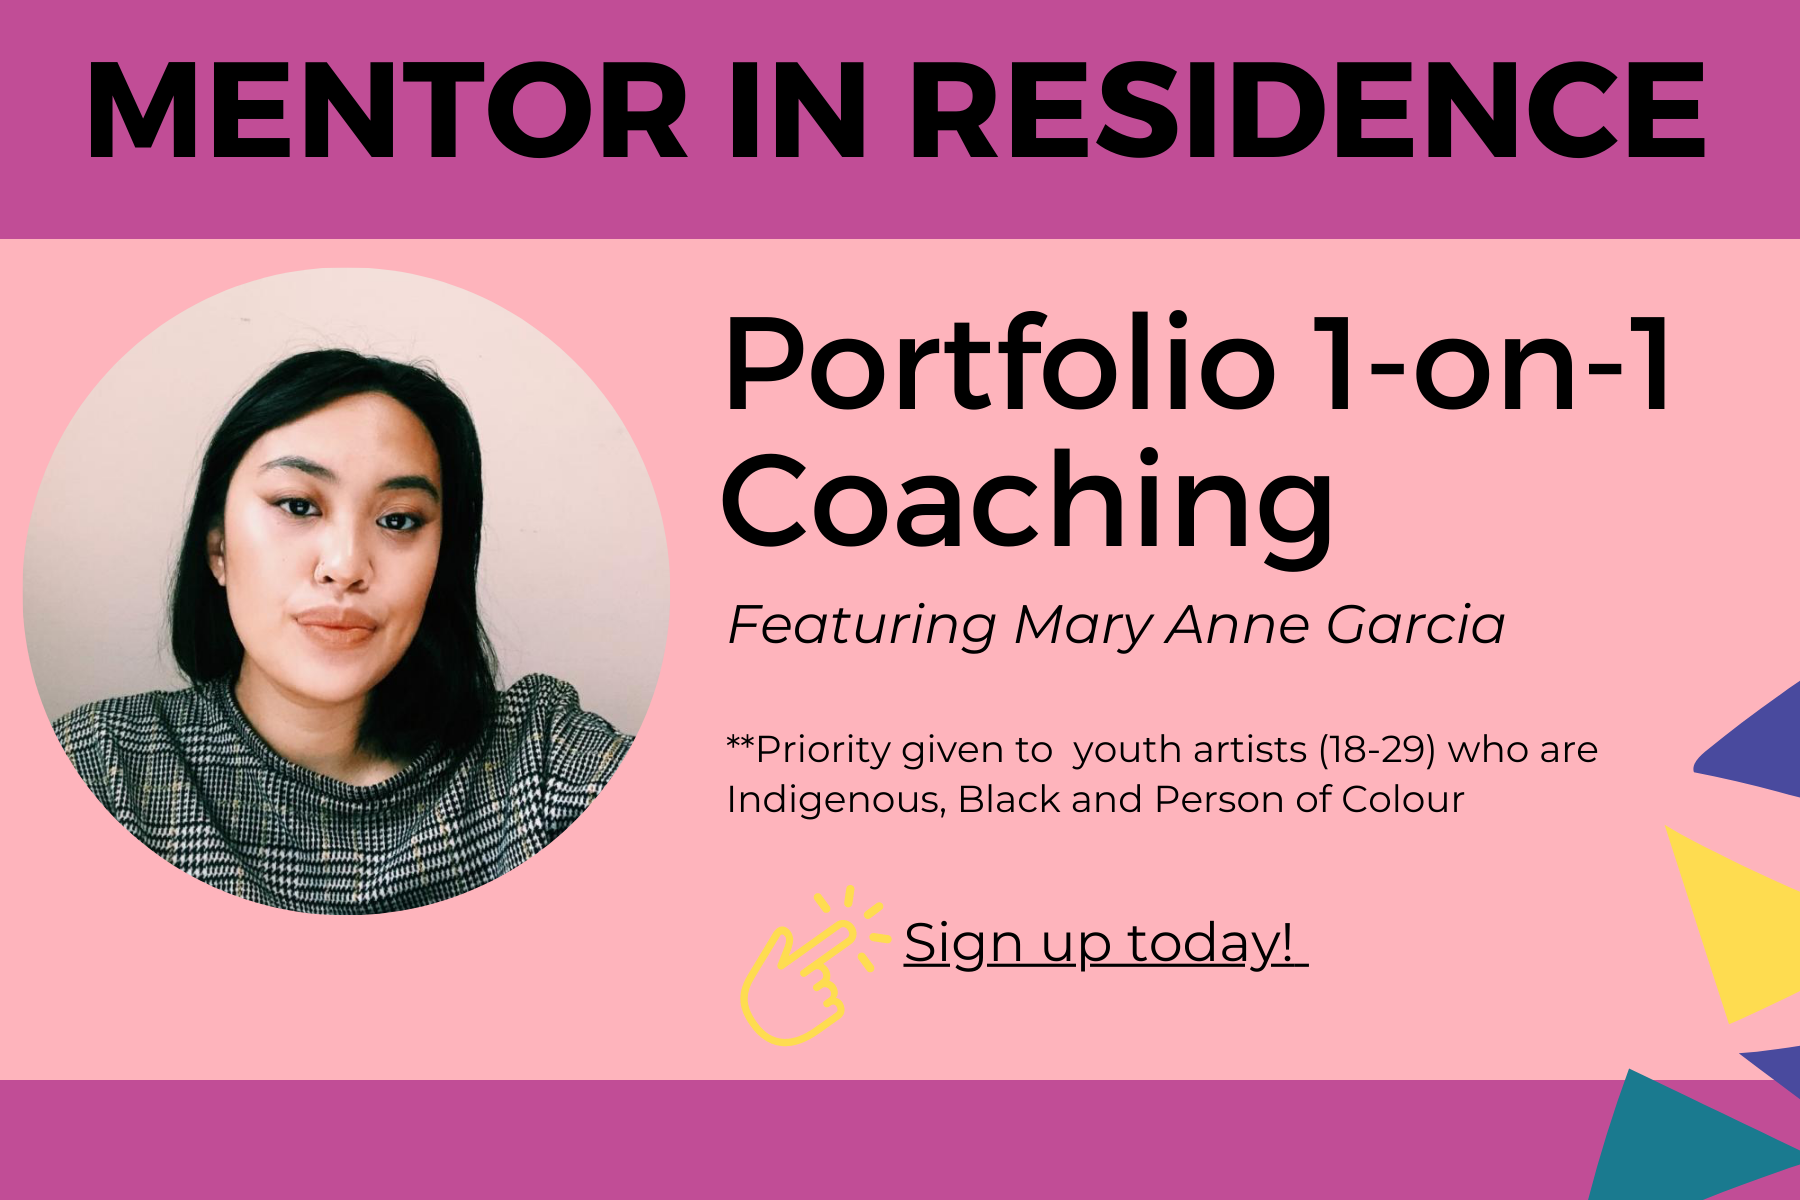 Image: Mary Anne Garcia, female, short dark hair, person of colour. Text reads: portfolio 1-on-1 coaching. Priority given to IBPOC youth 